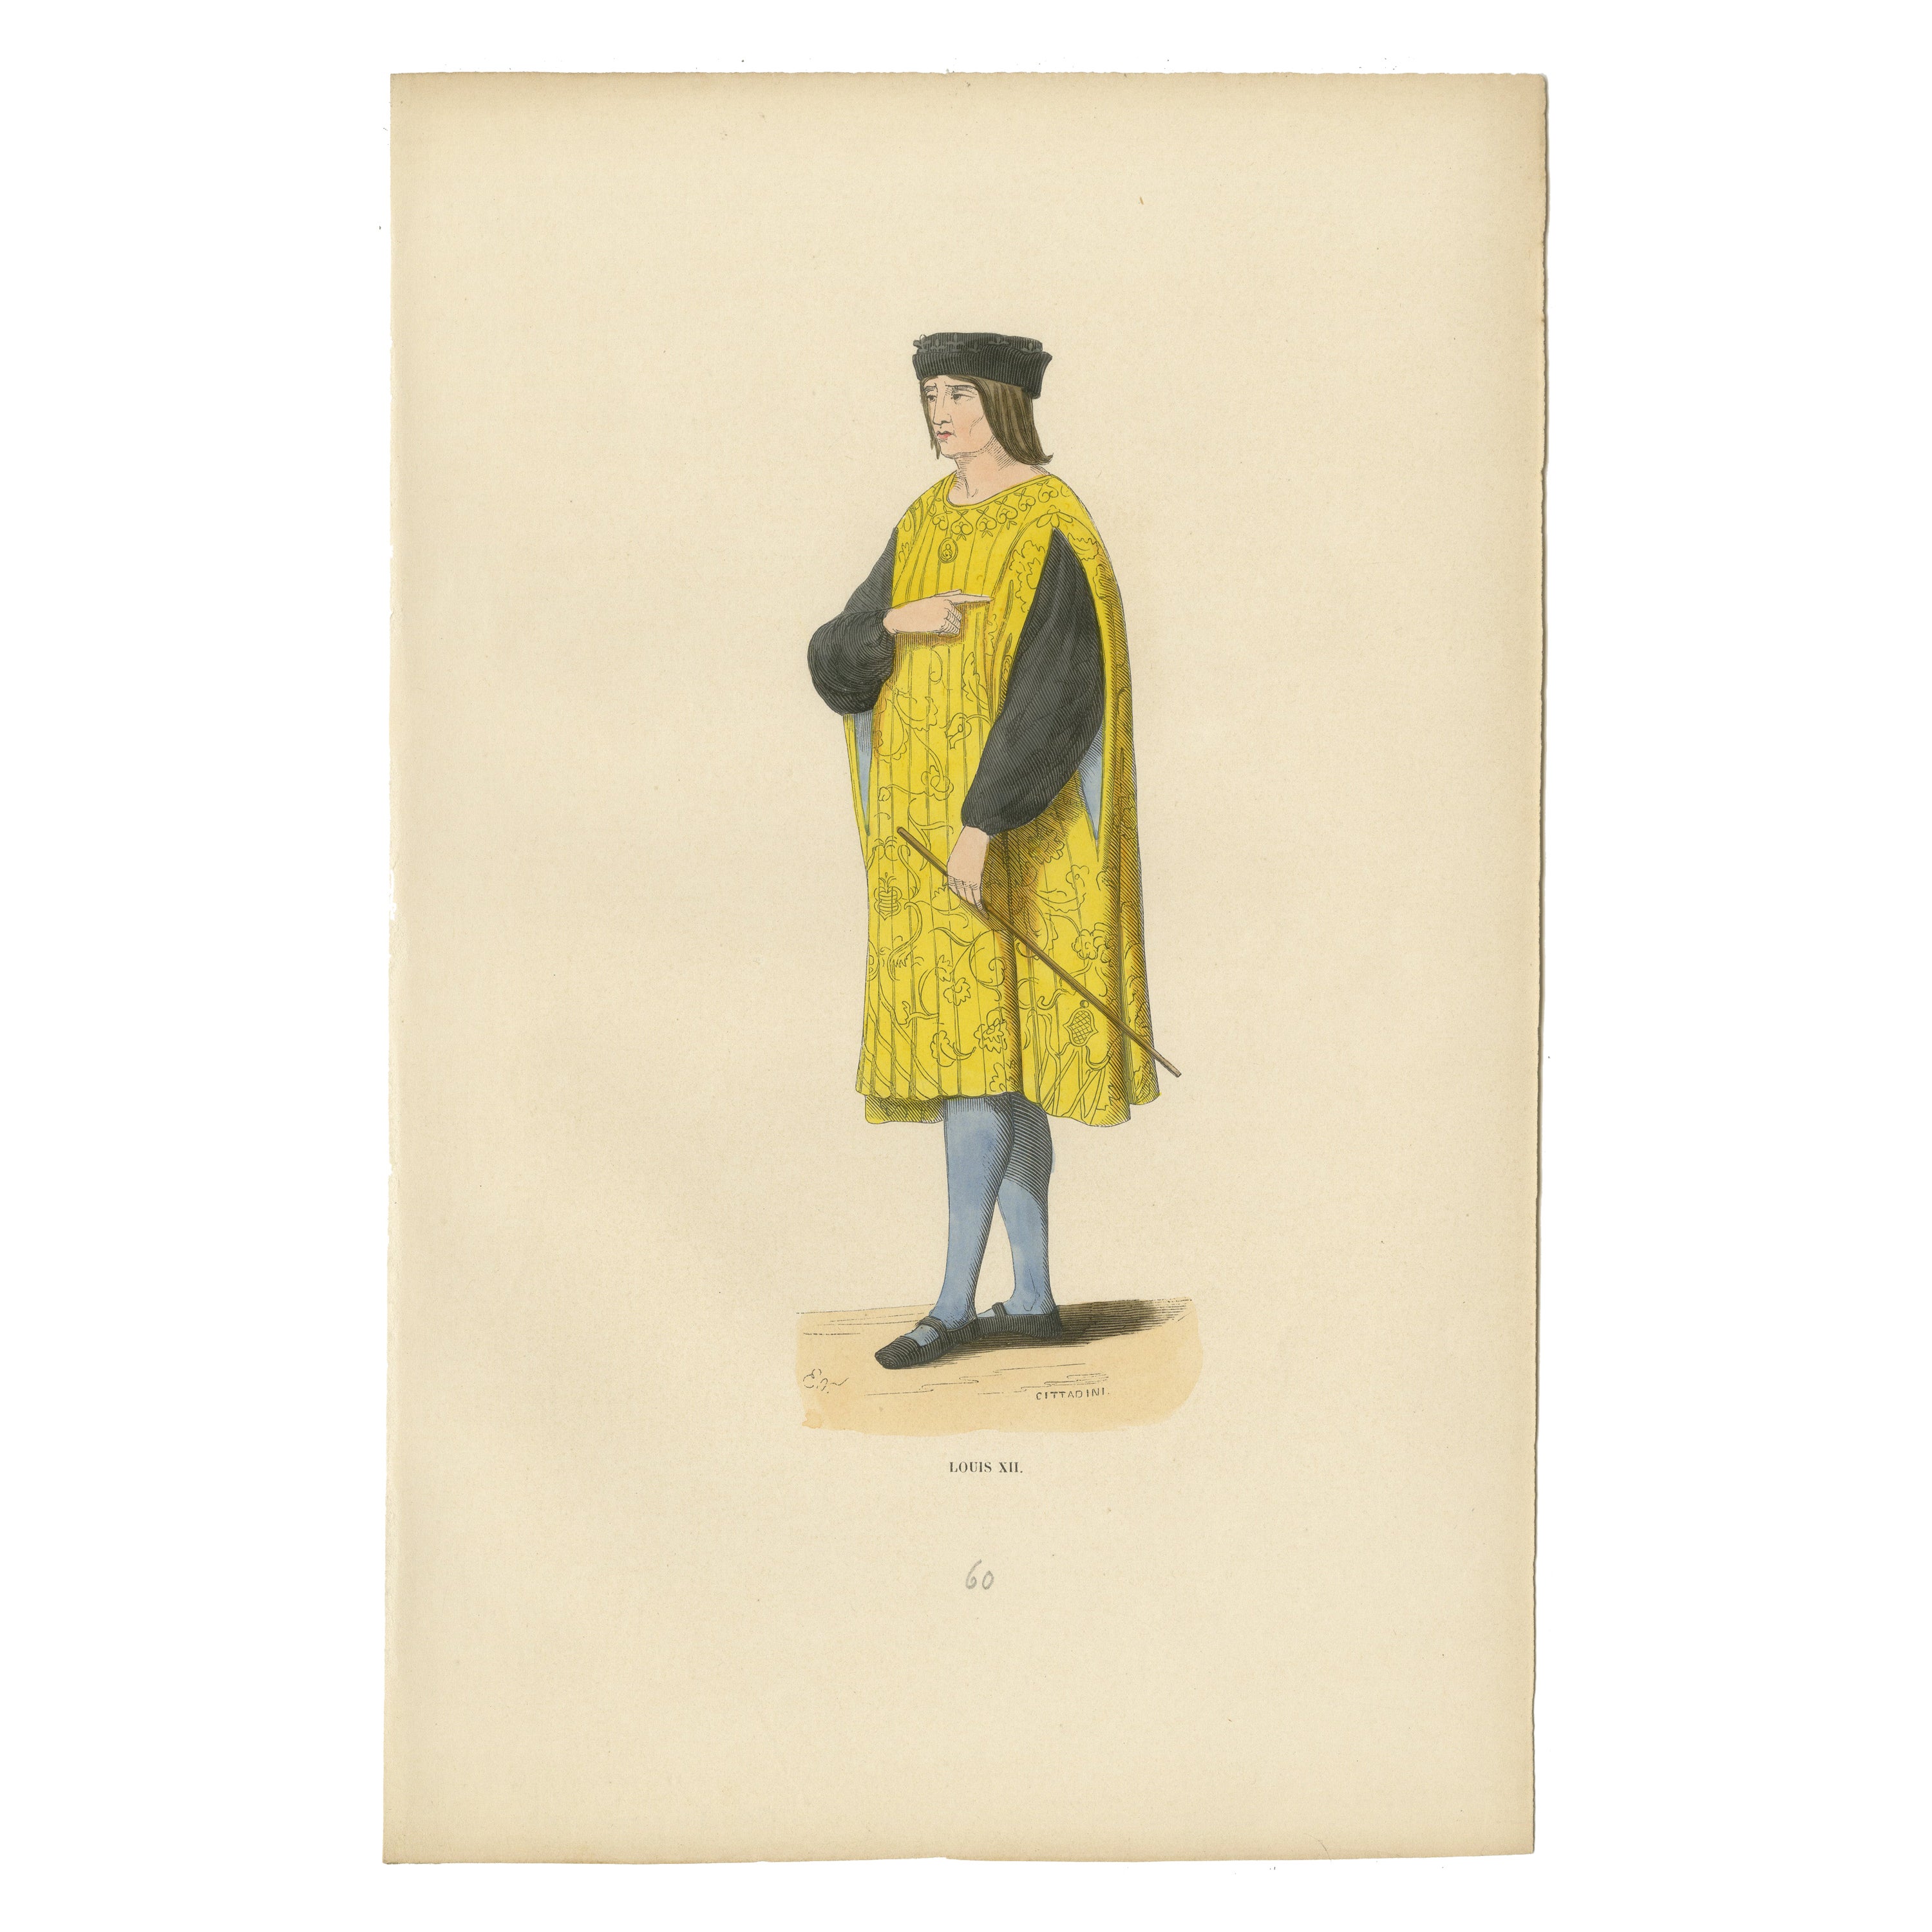 Louis XII: The Prudent King in Regal Attire, 1847